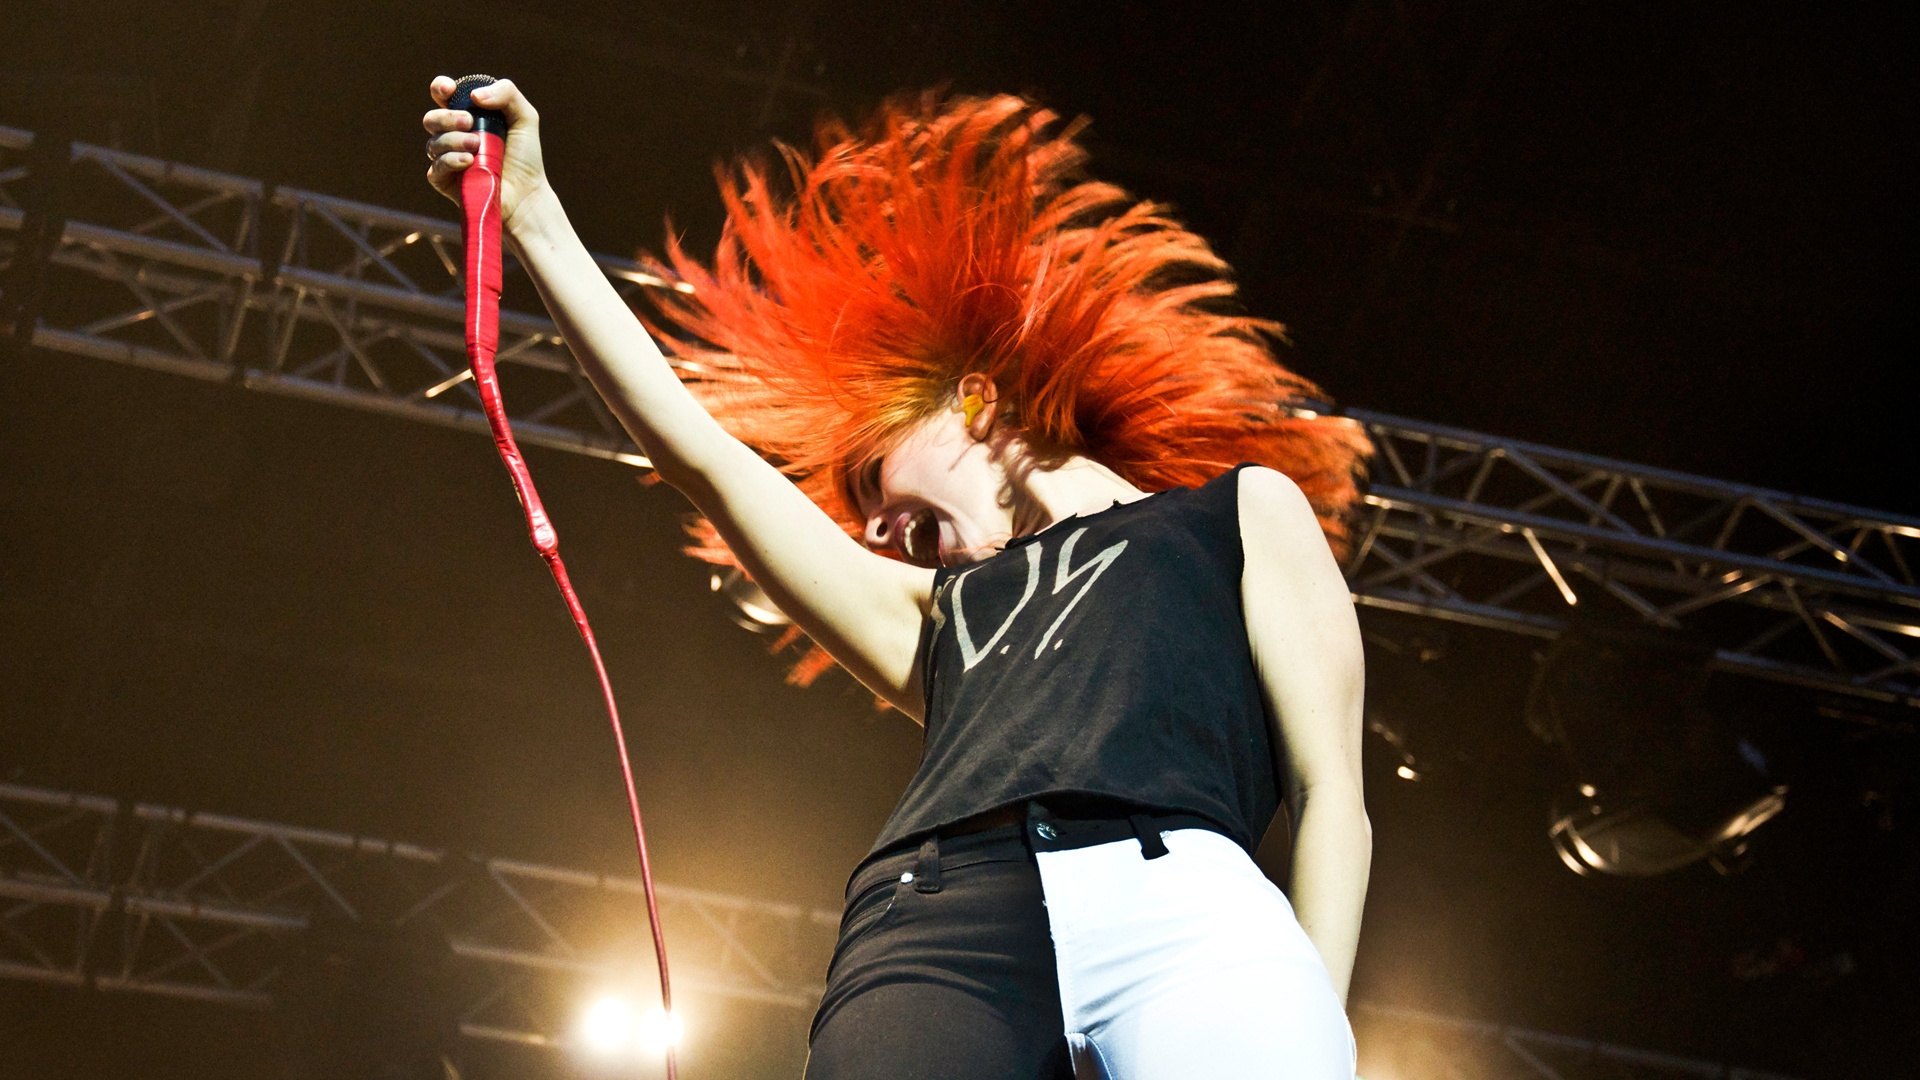 Paramore band, Microphone, Hayley Williams, Concert, 1920x1080 Full HD Desktop